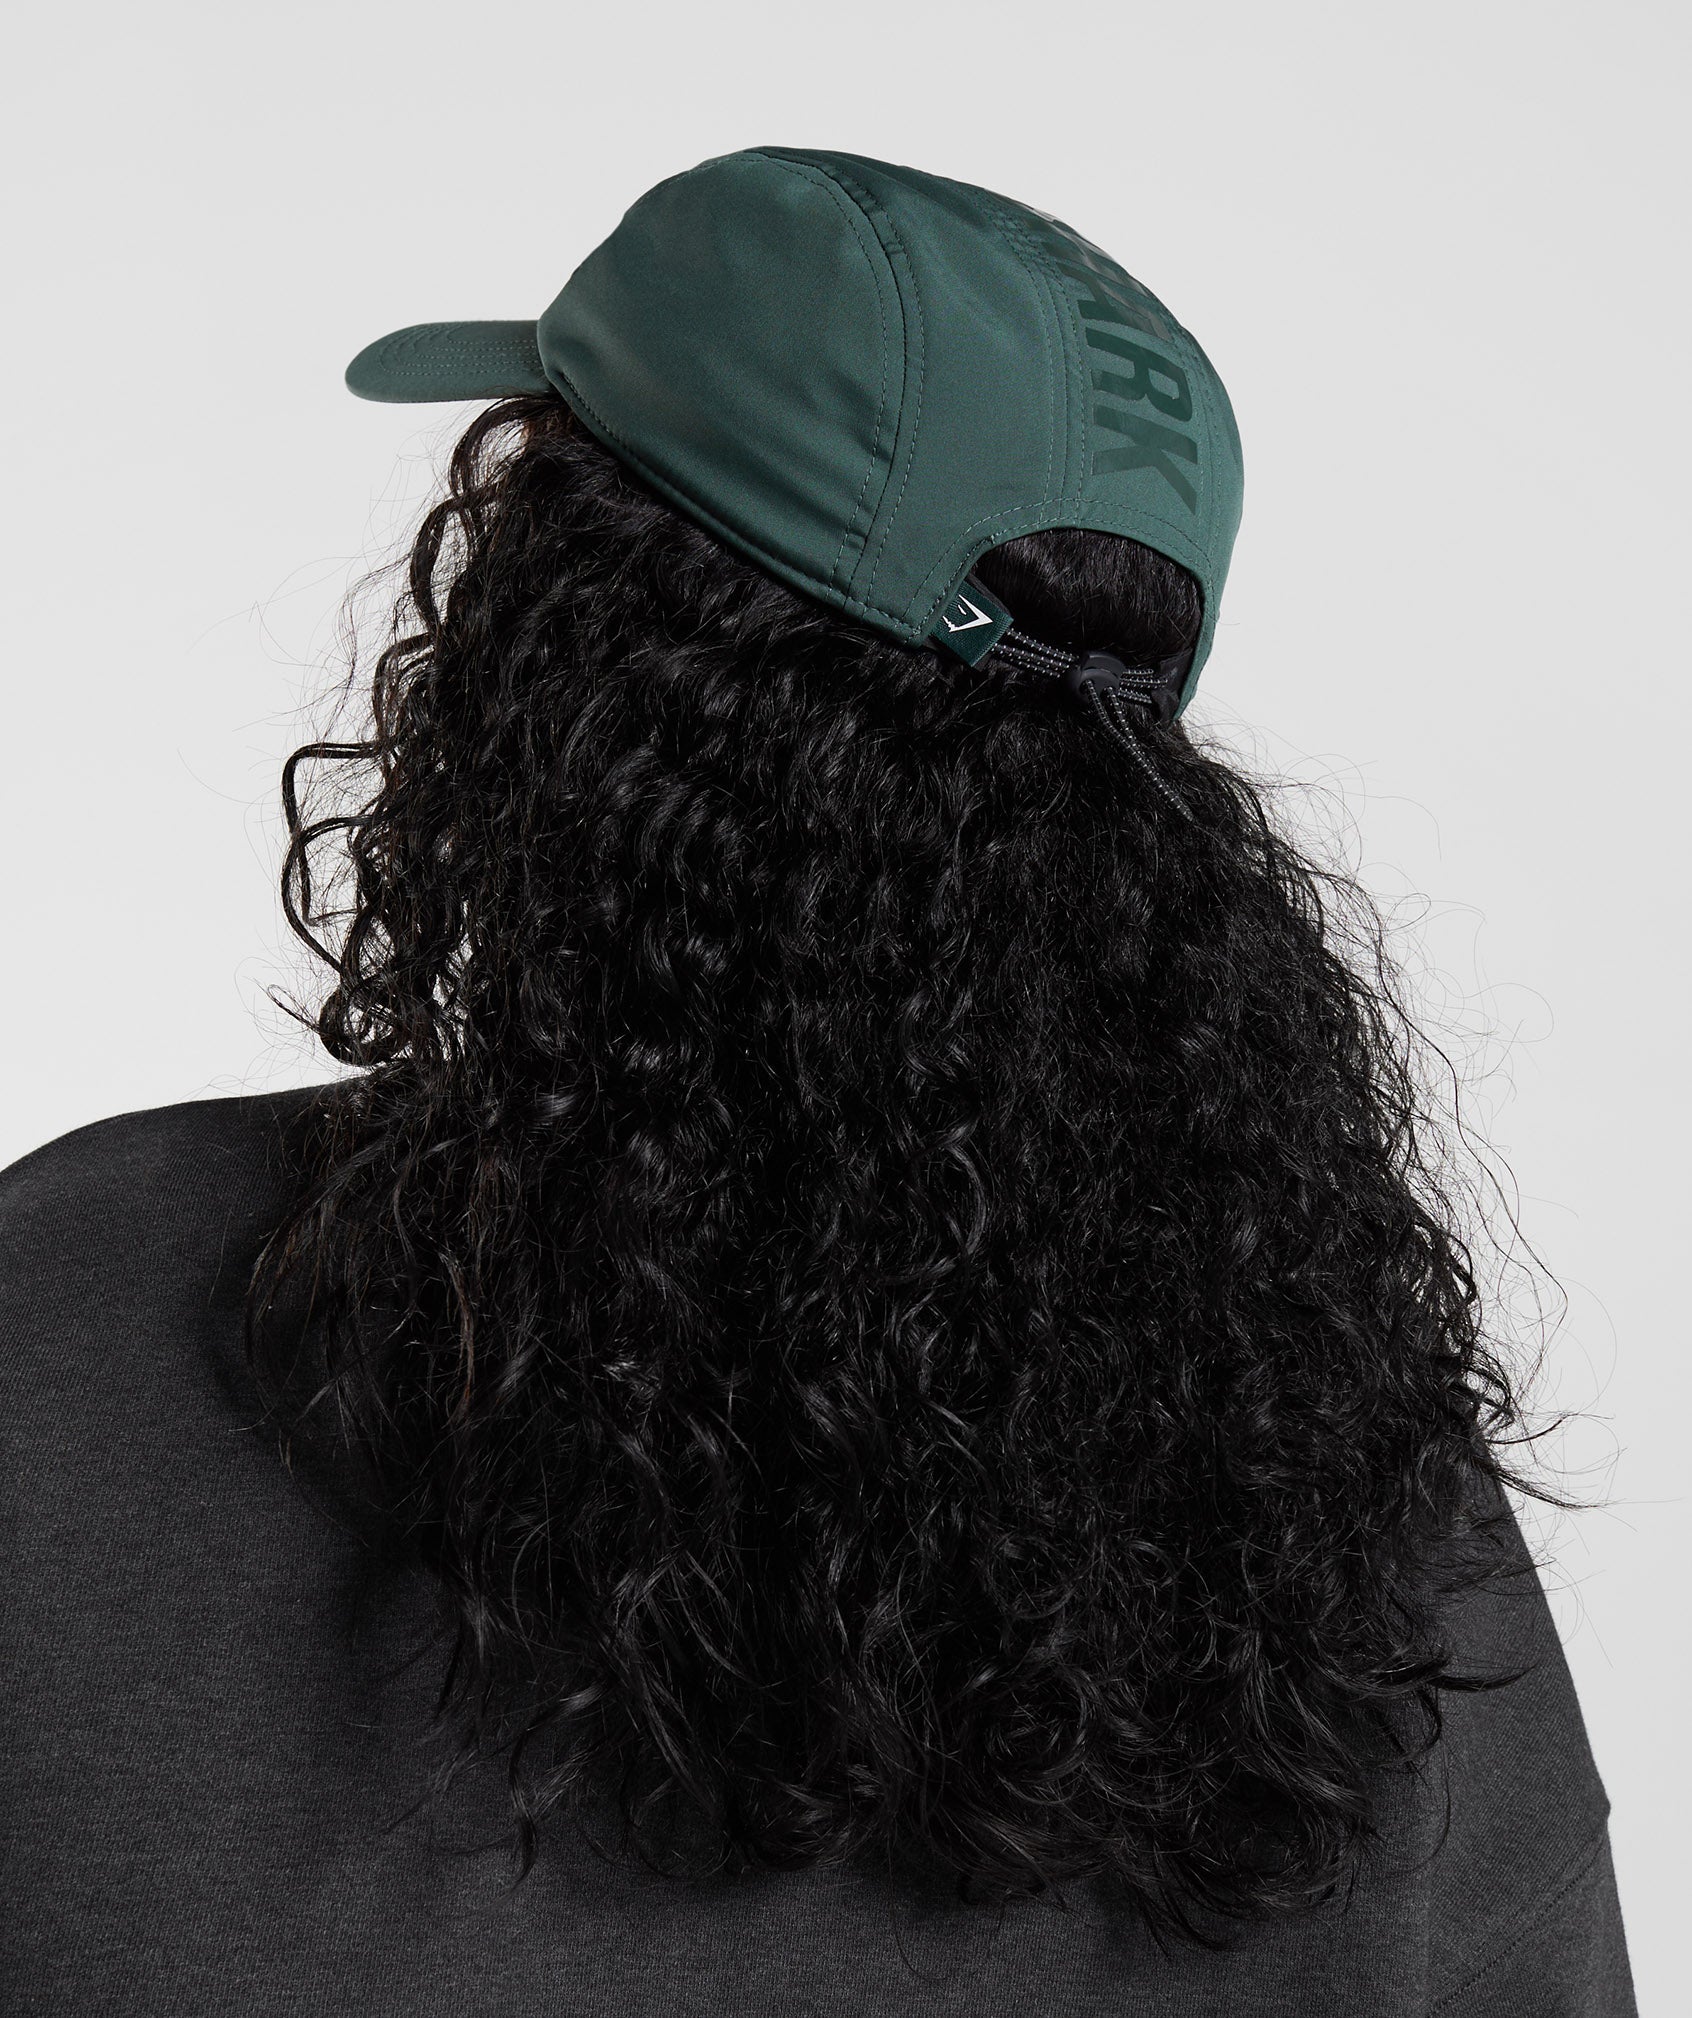  5 Panel Running Cap in Obsidian Green - view 8